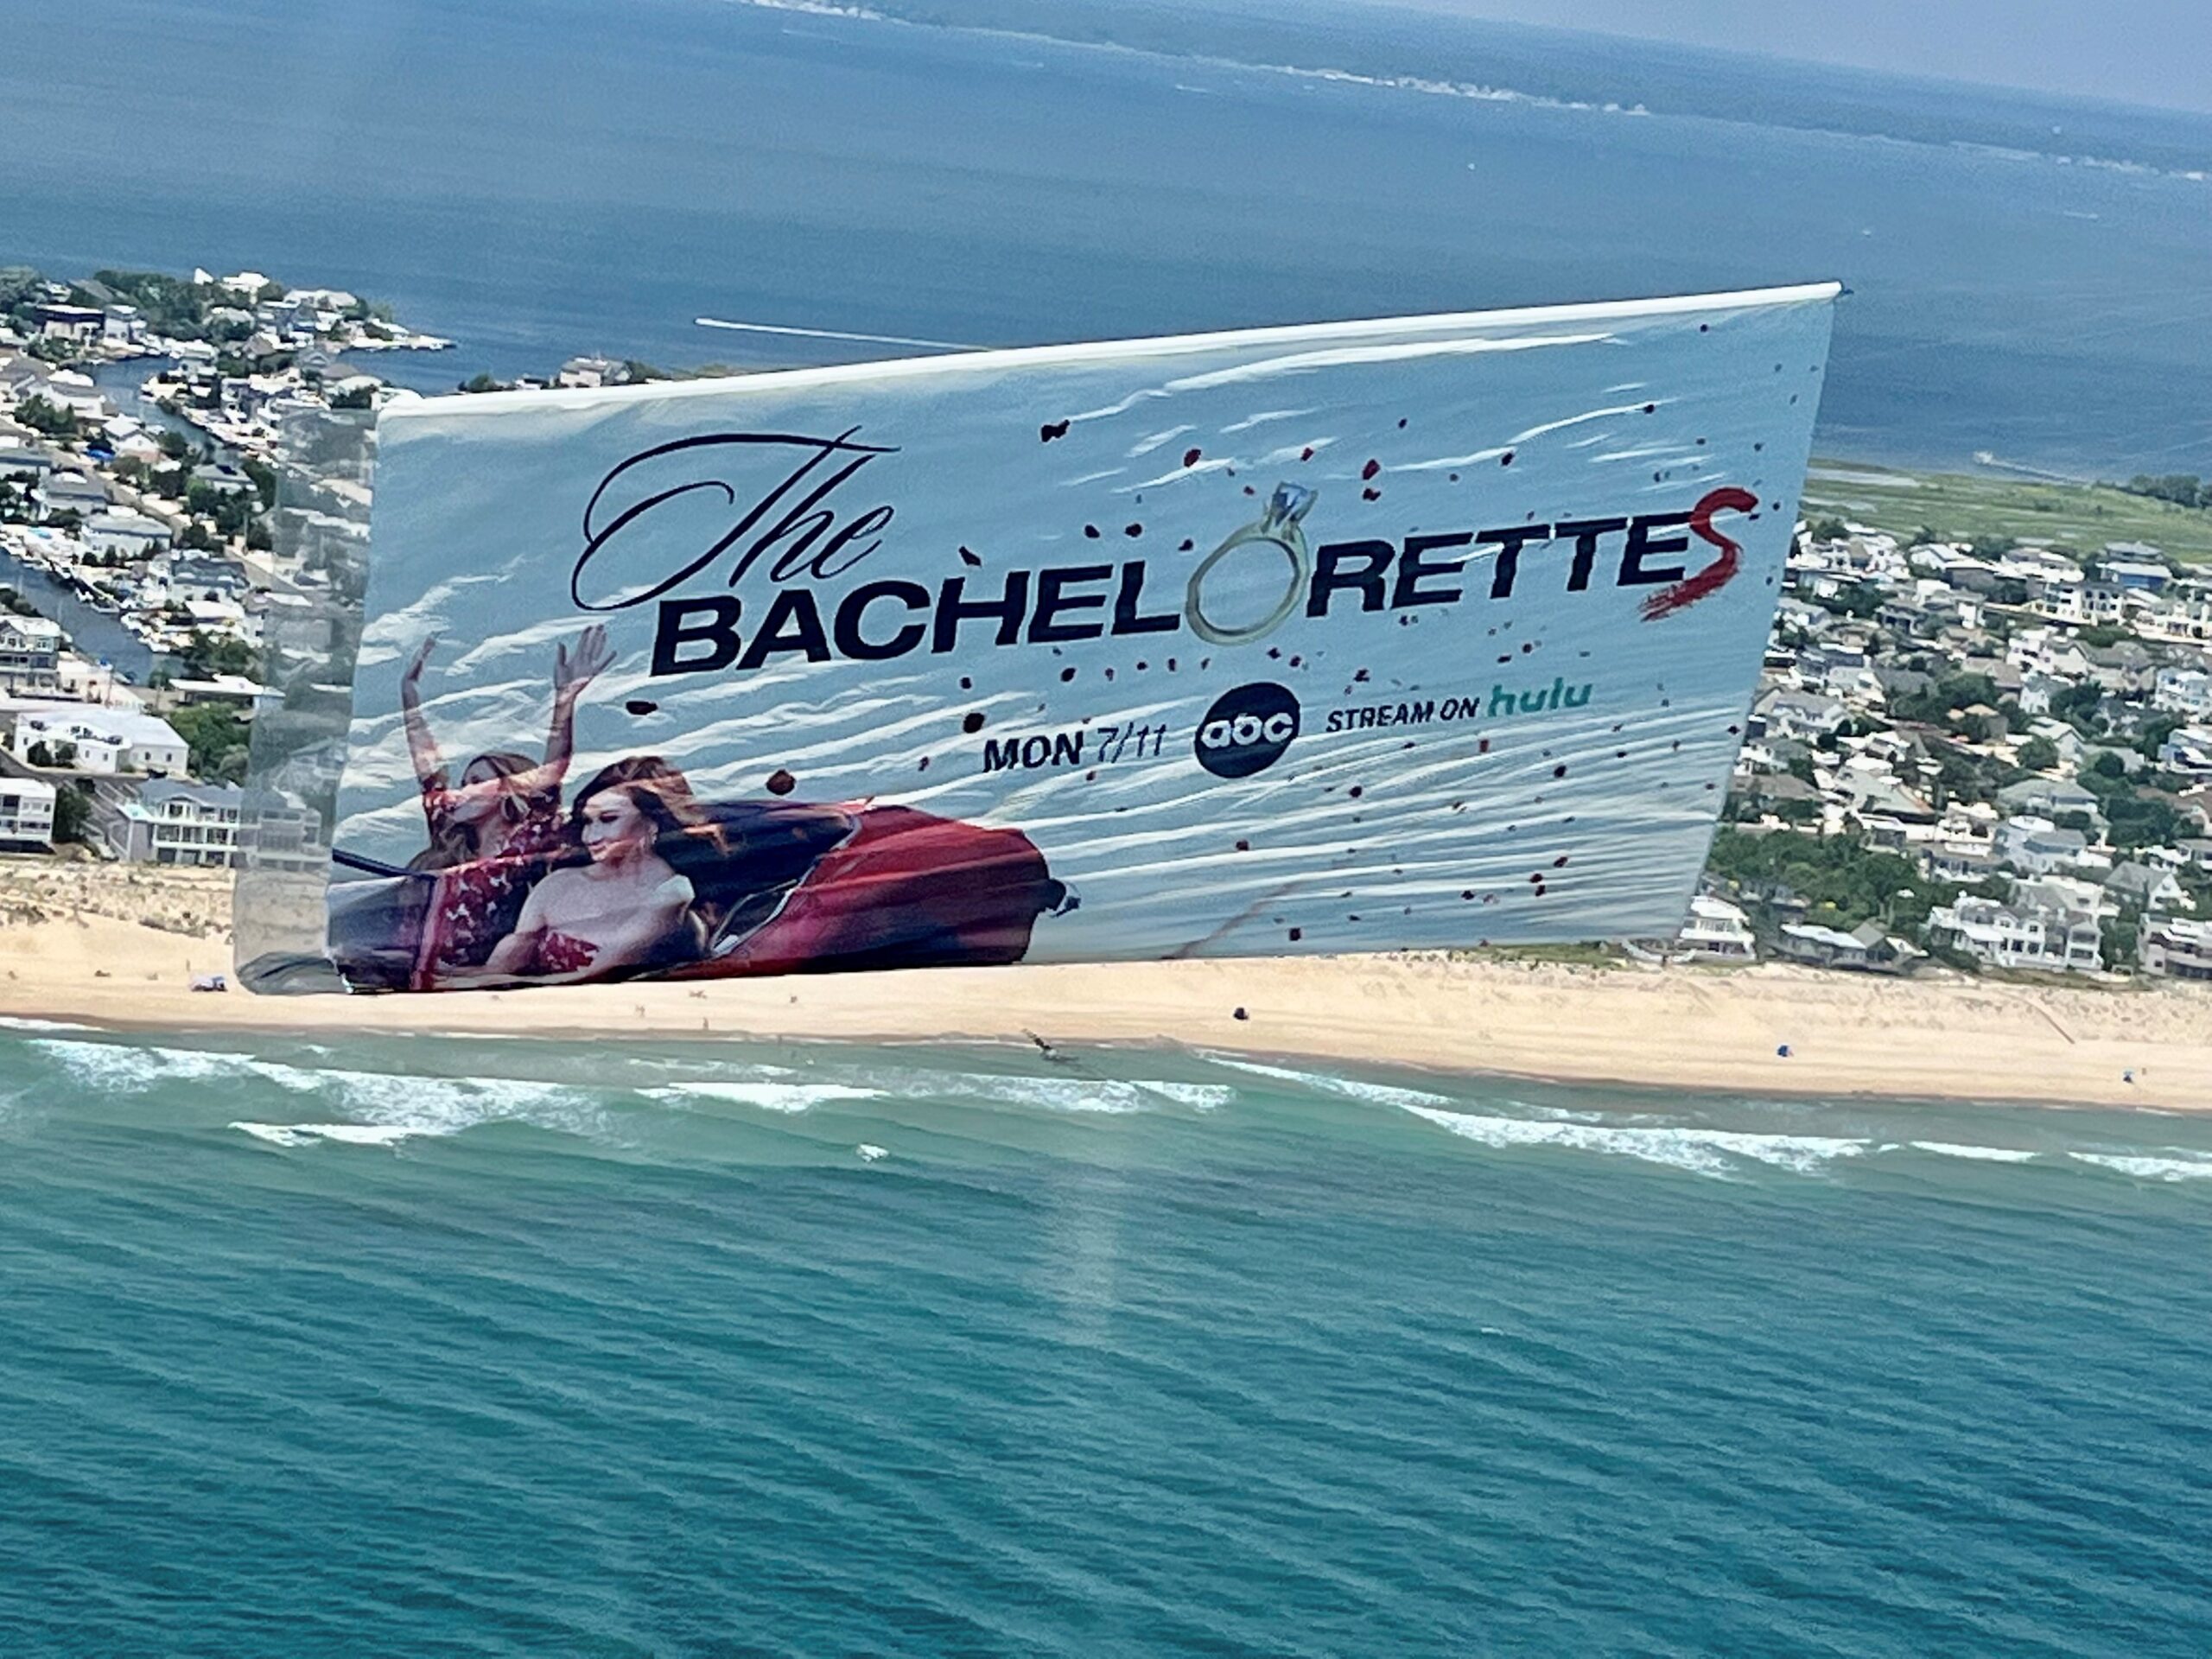 ABC Bachelorettes Aerial Billboard over New Jersey